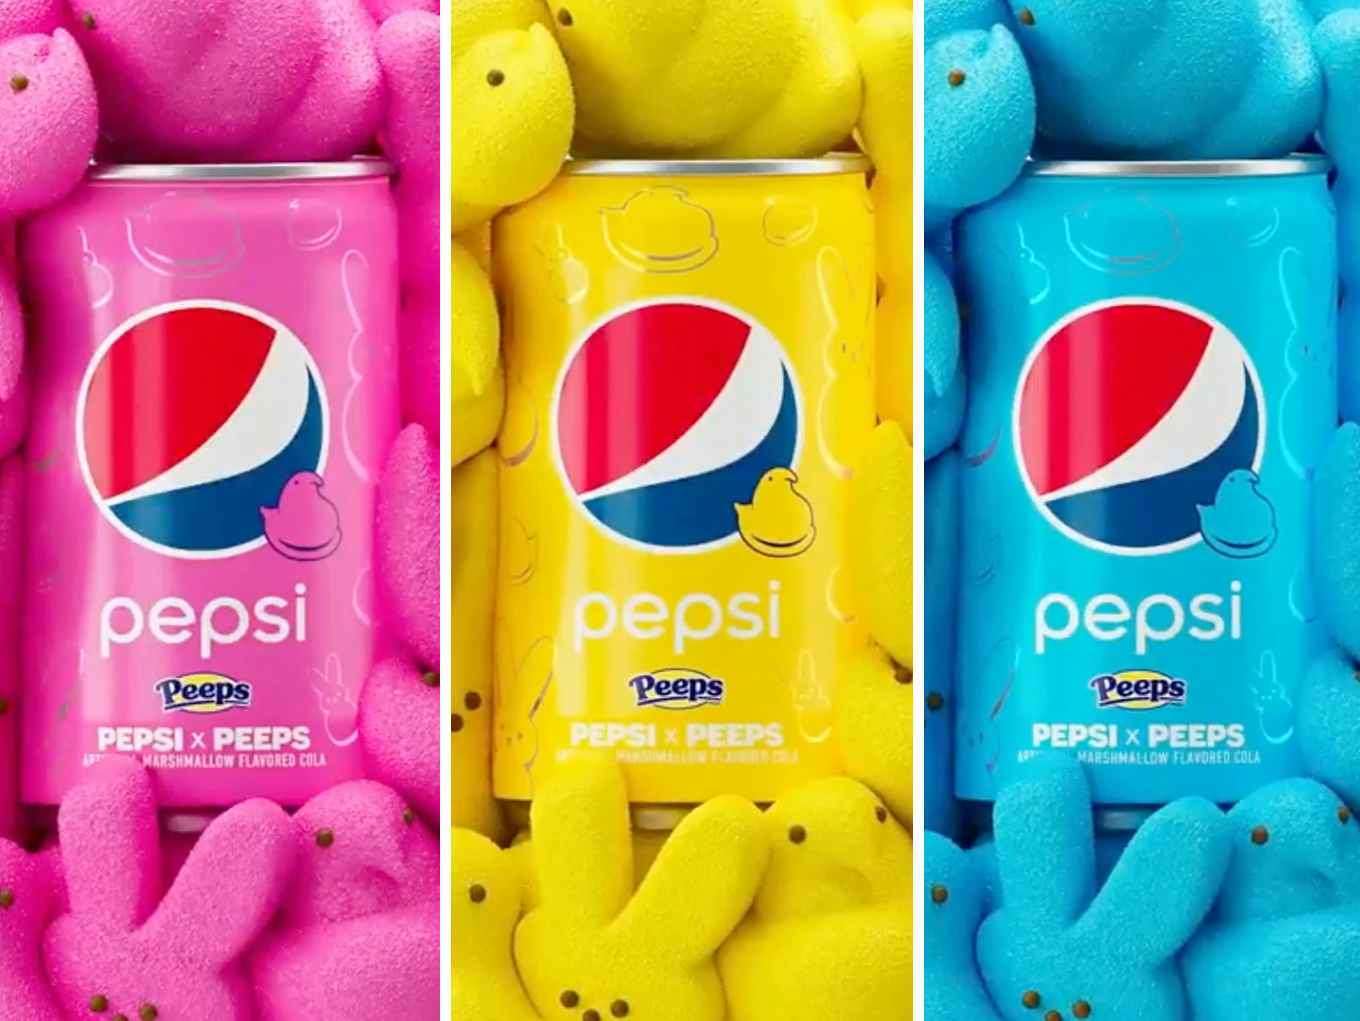 pepsi peeps collaboration showing pink yellow and blue cans